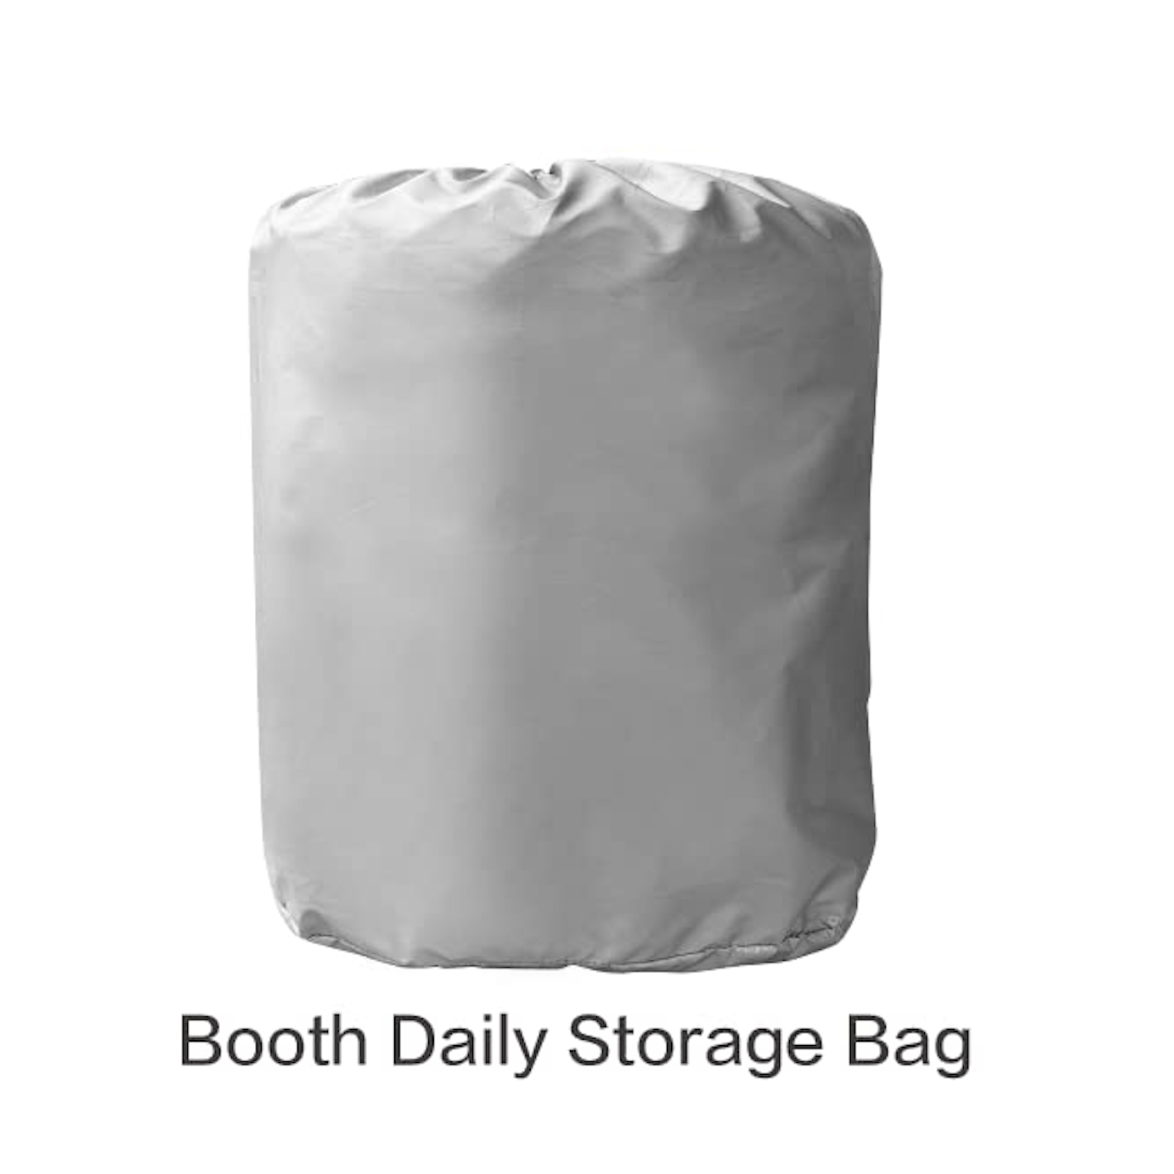 Booth Daily Storage Bag